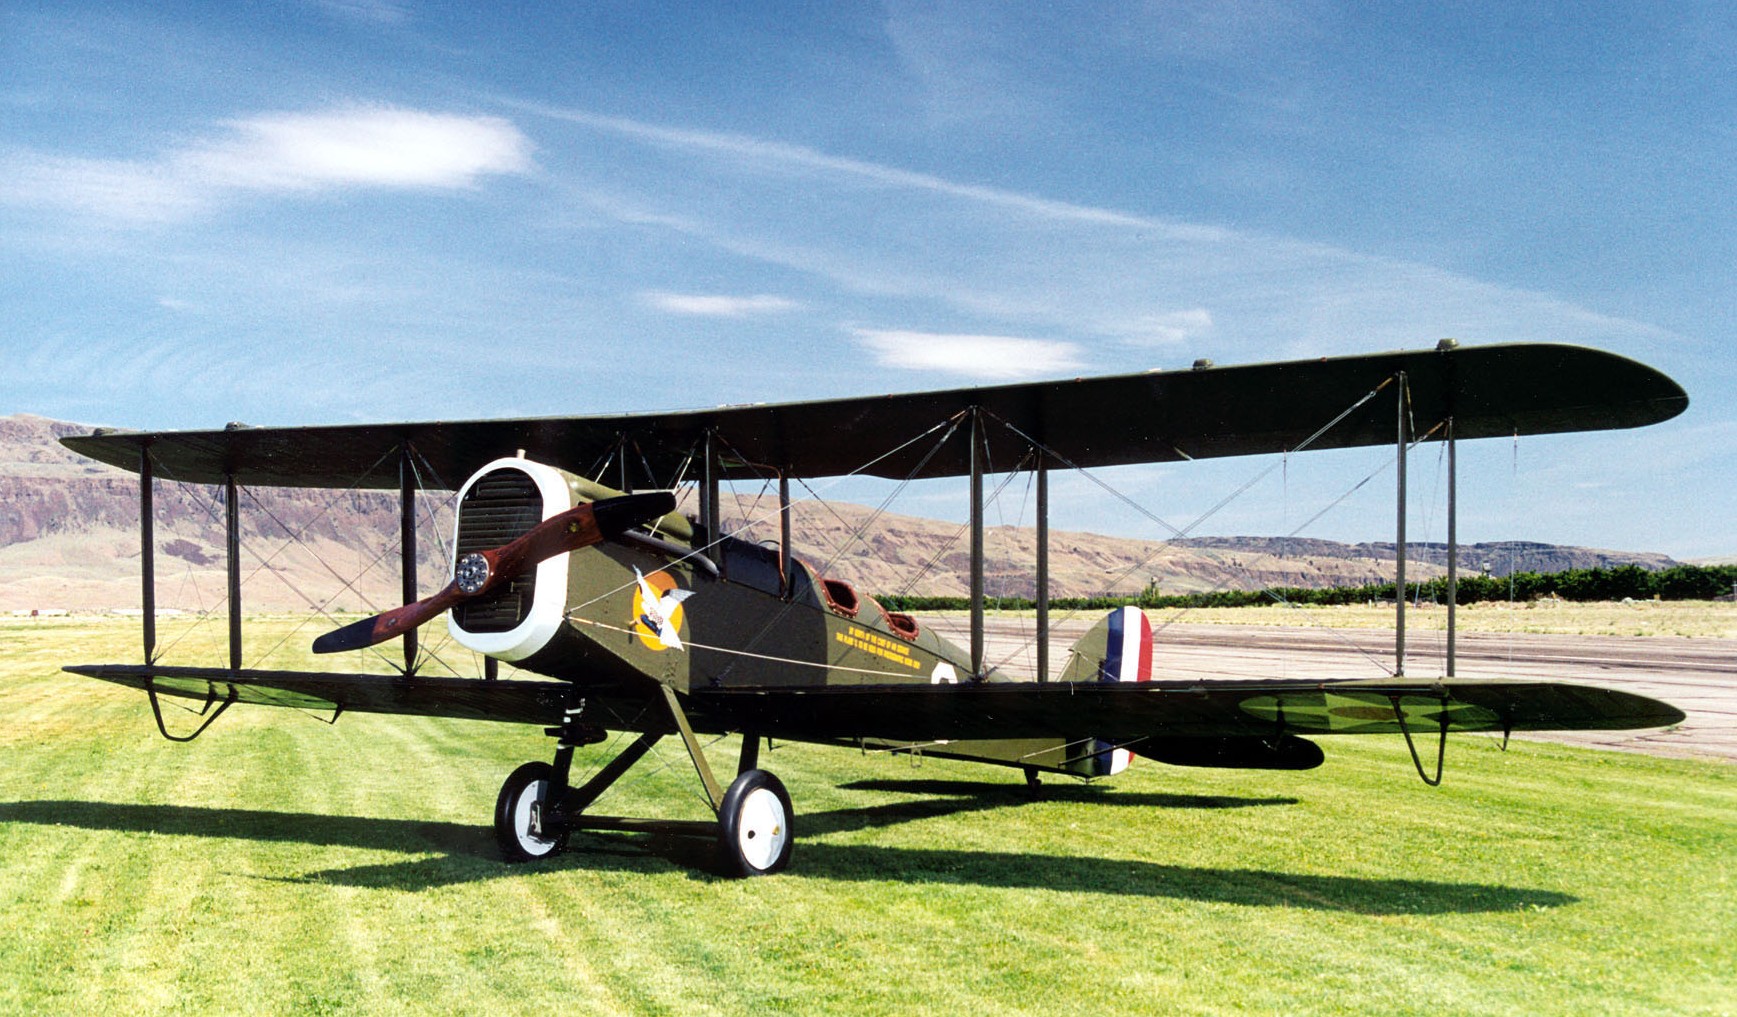 This reproduction of Atlantic Aircraft Corporation DH-4M-2, serial number A.S. 63385, is in the collection of the National Museum of the United States Air Force. (U.S. Air Force)